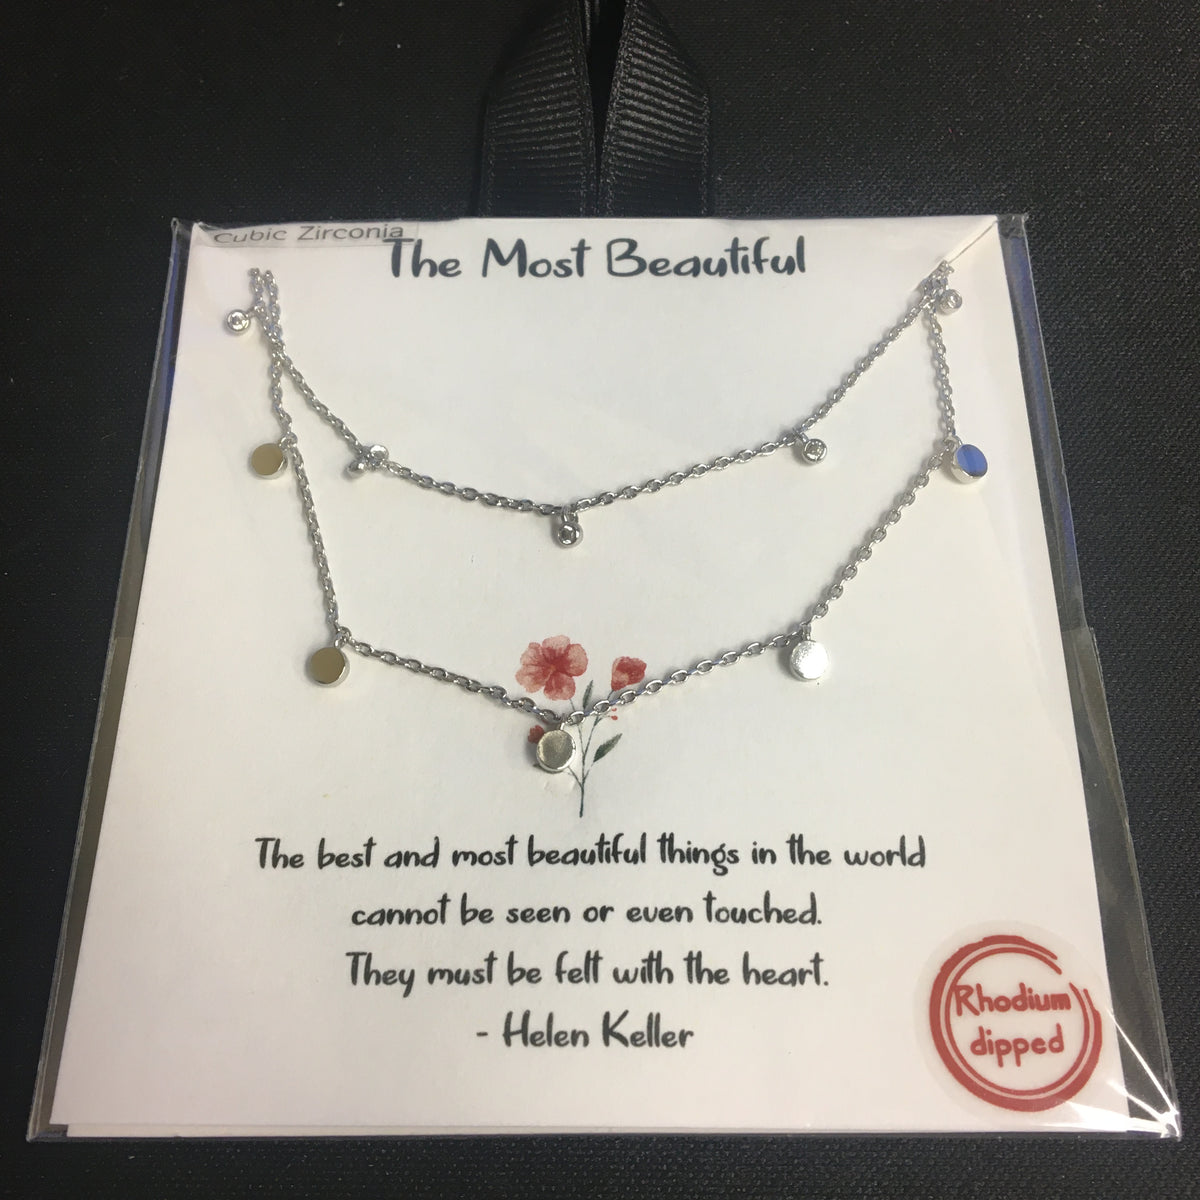 The Most Beautiful Necklace